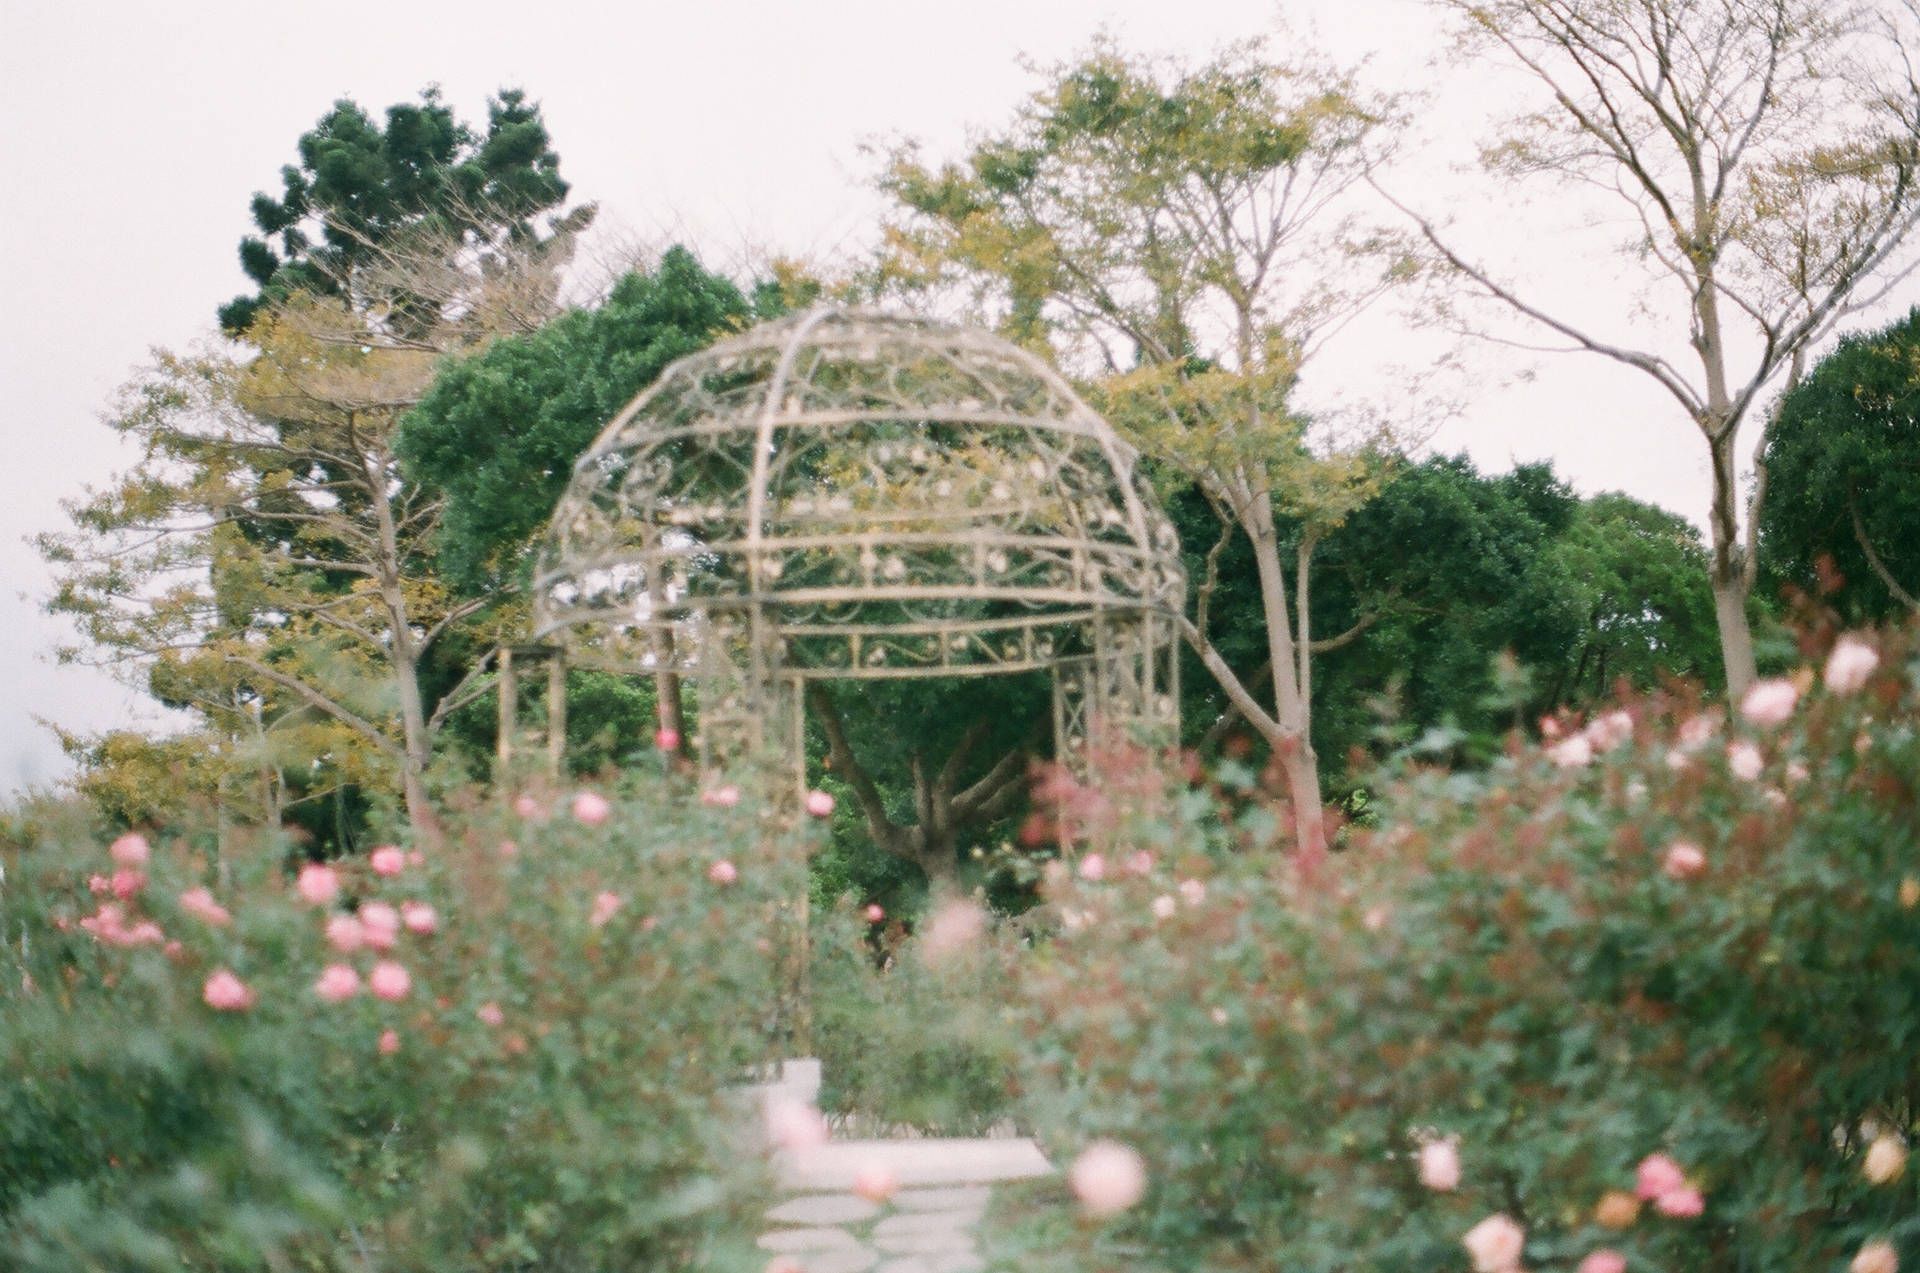 Pink roses in a garden with a gazebo in the background - Garden